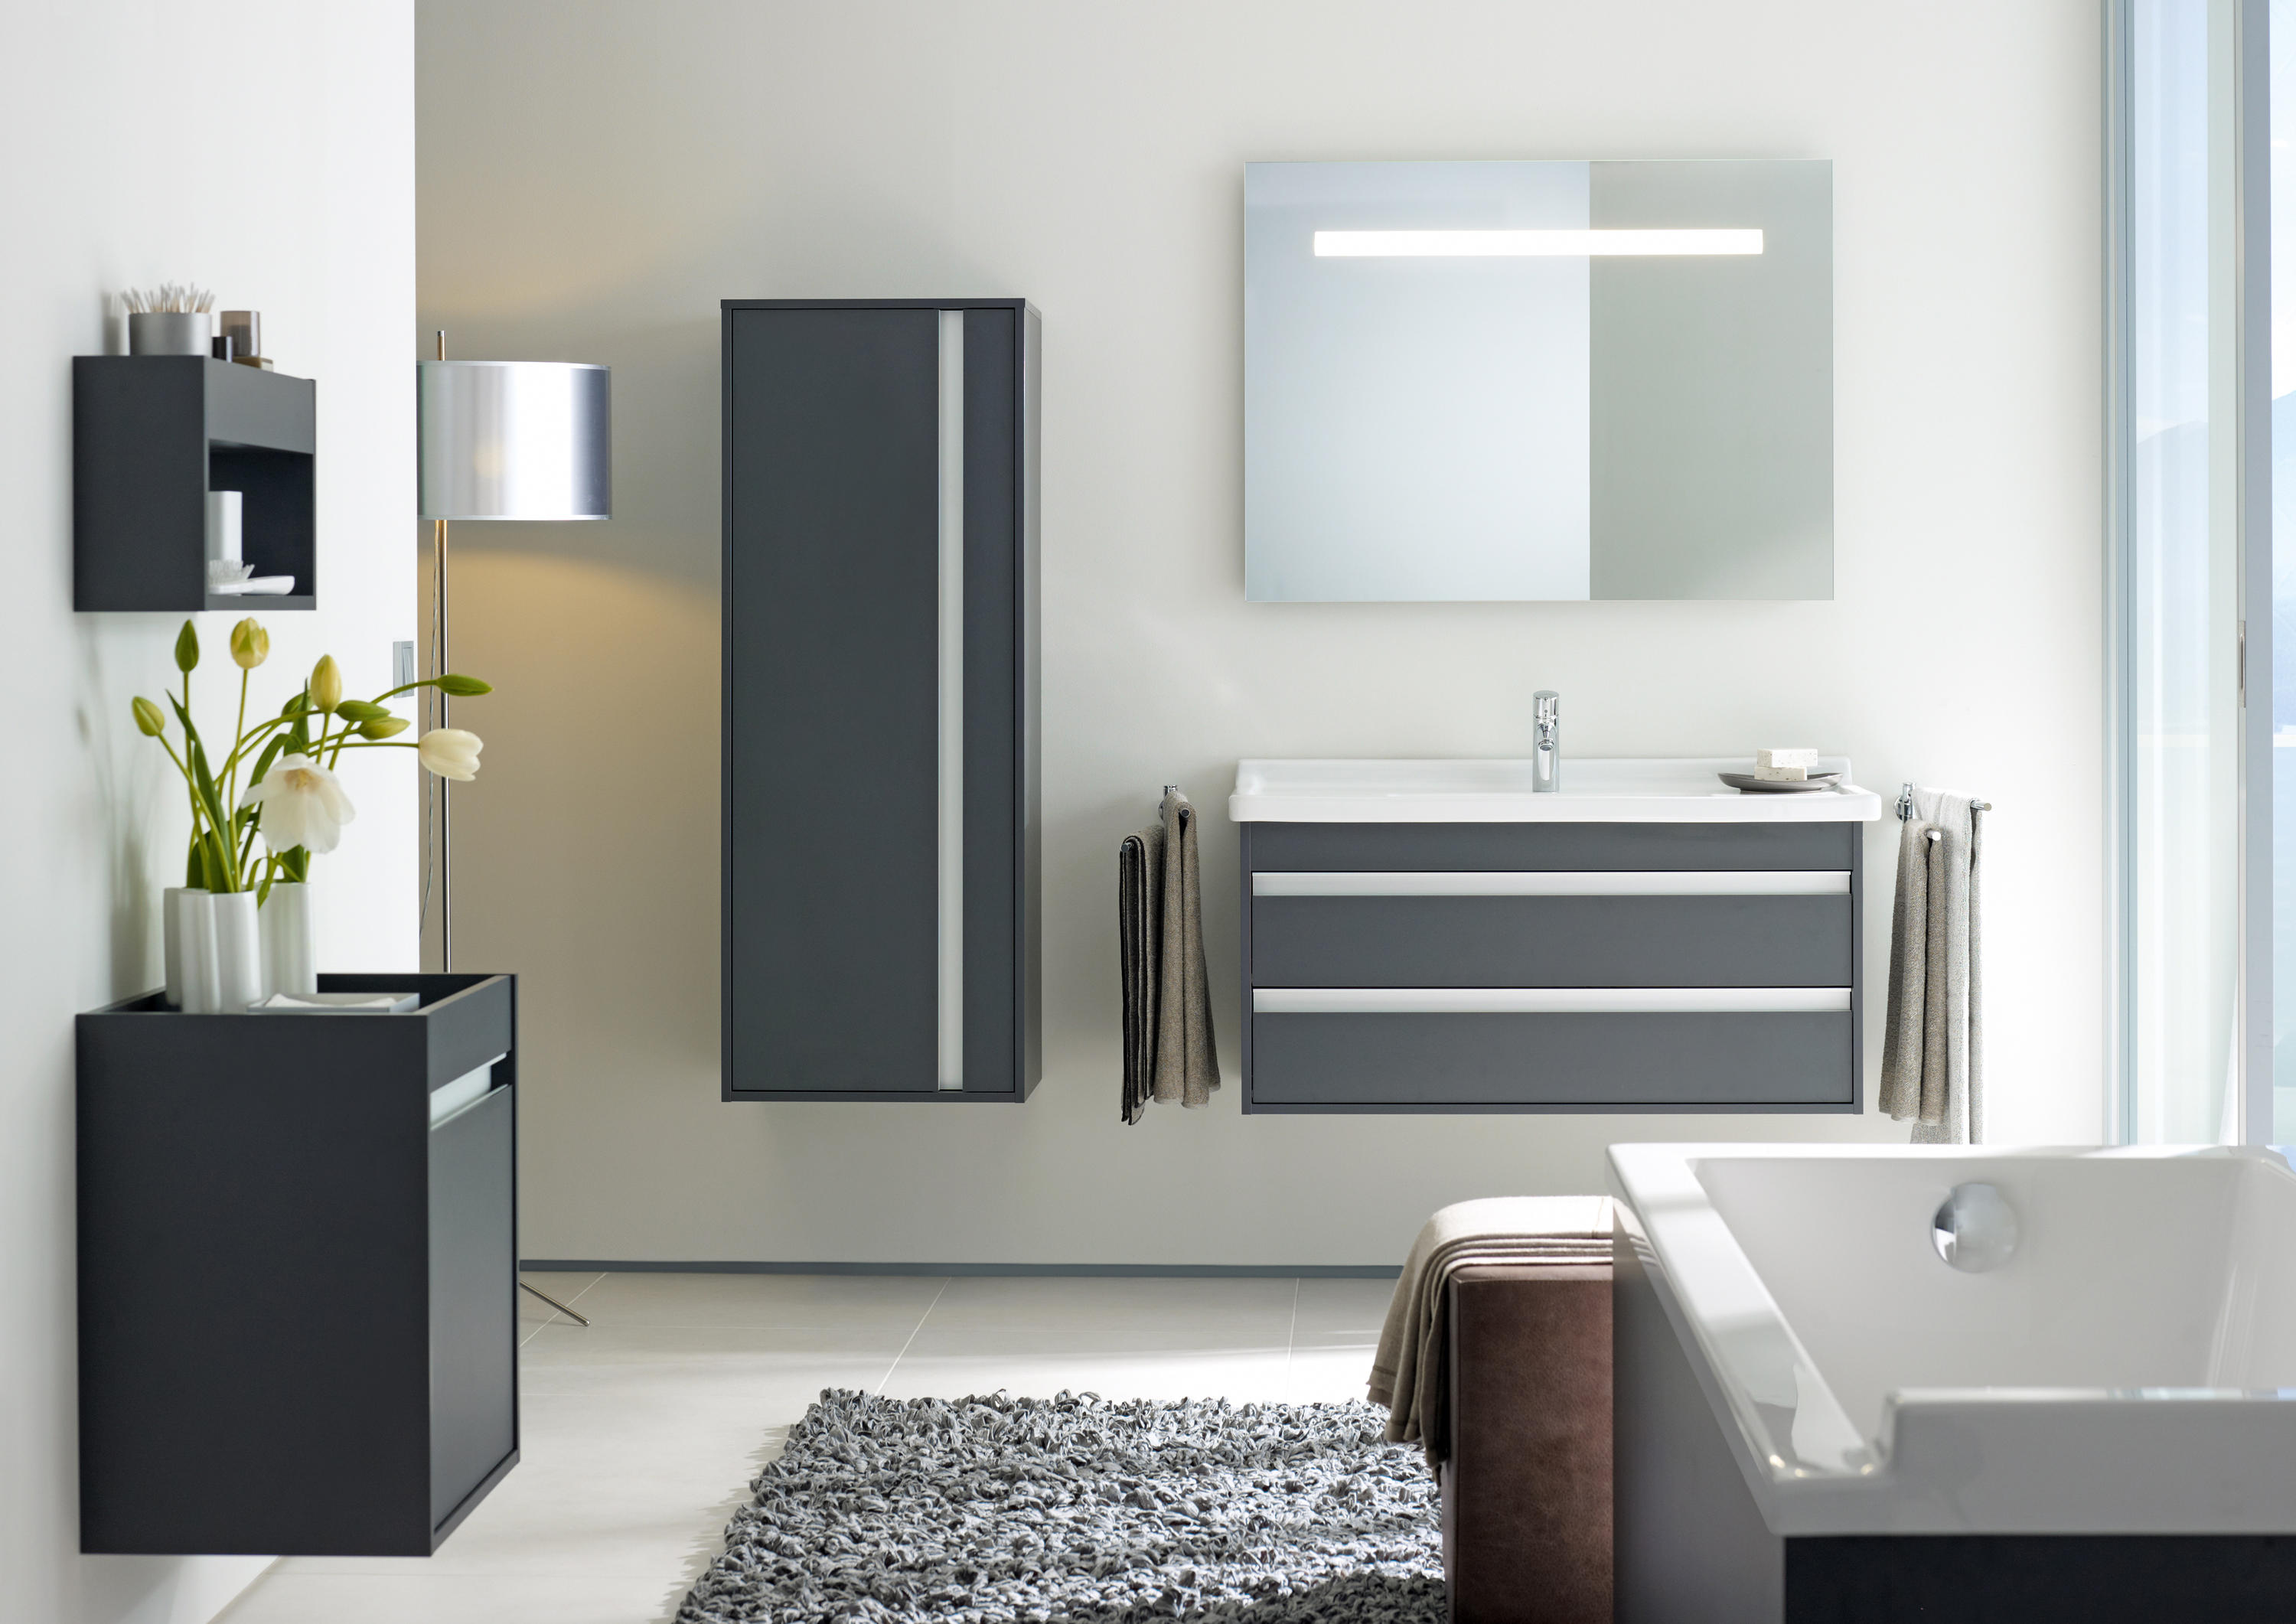 with | Vanity Ketho integrated console - units Architonic